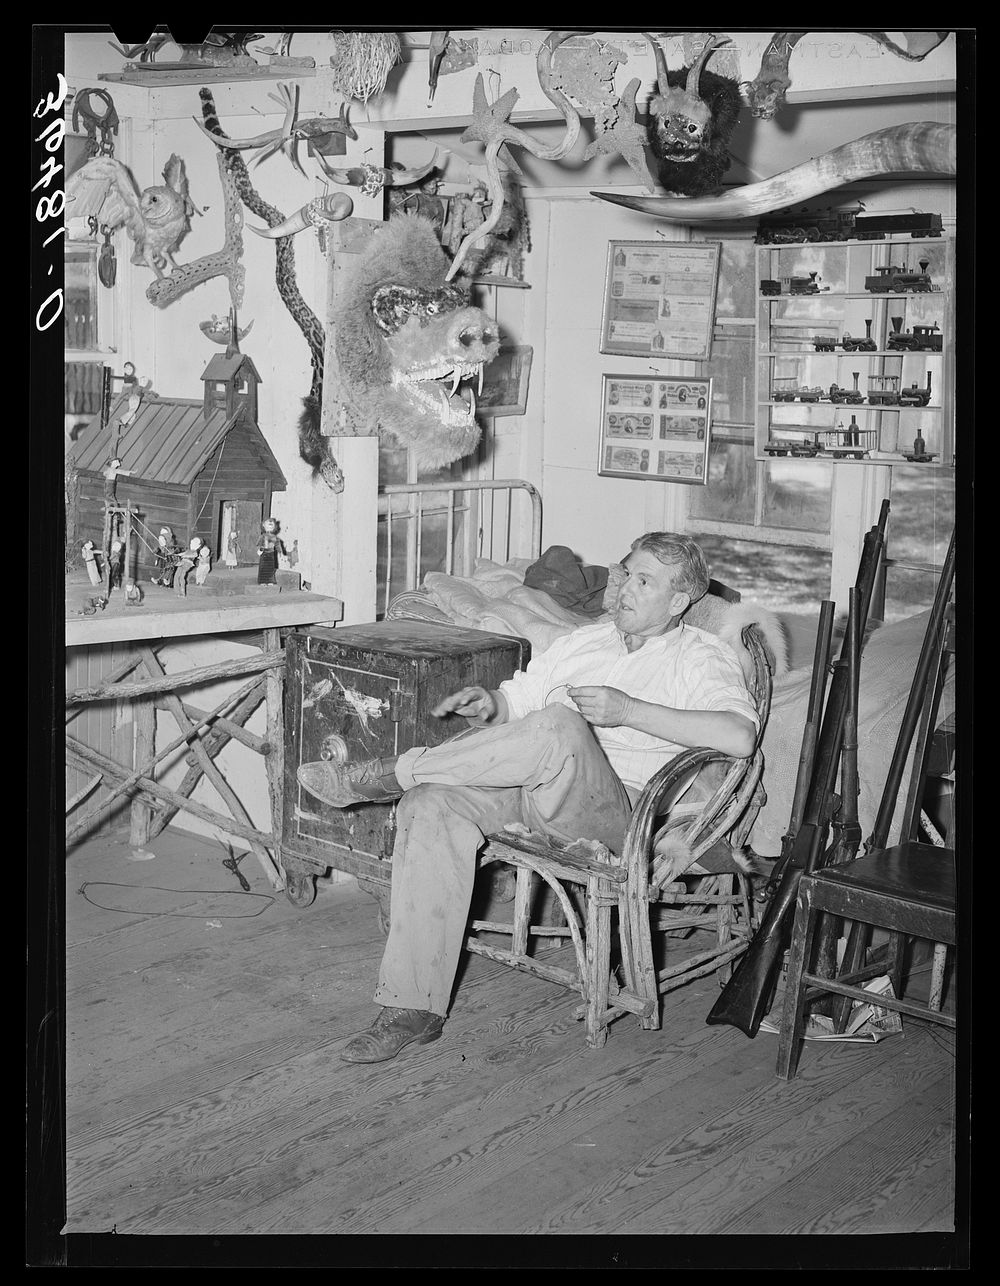 Homer Tate sitting among his creations. Safford, Arizona by Russell Lee